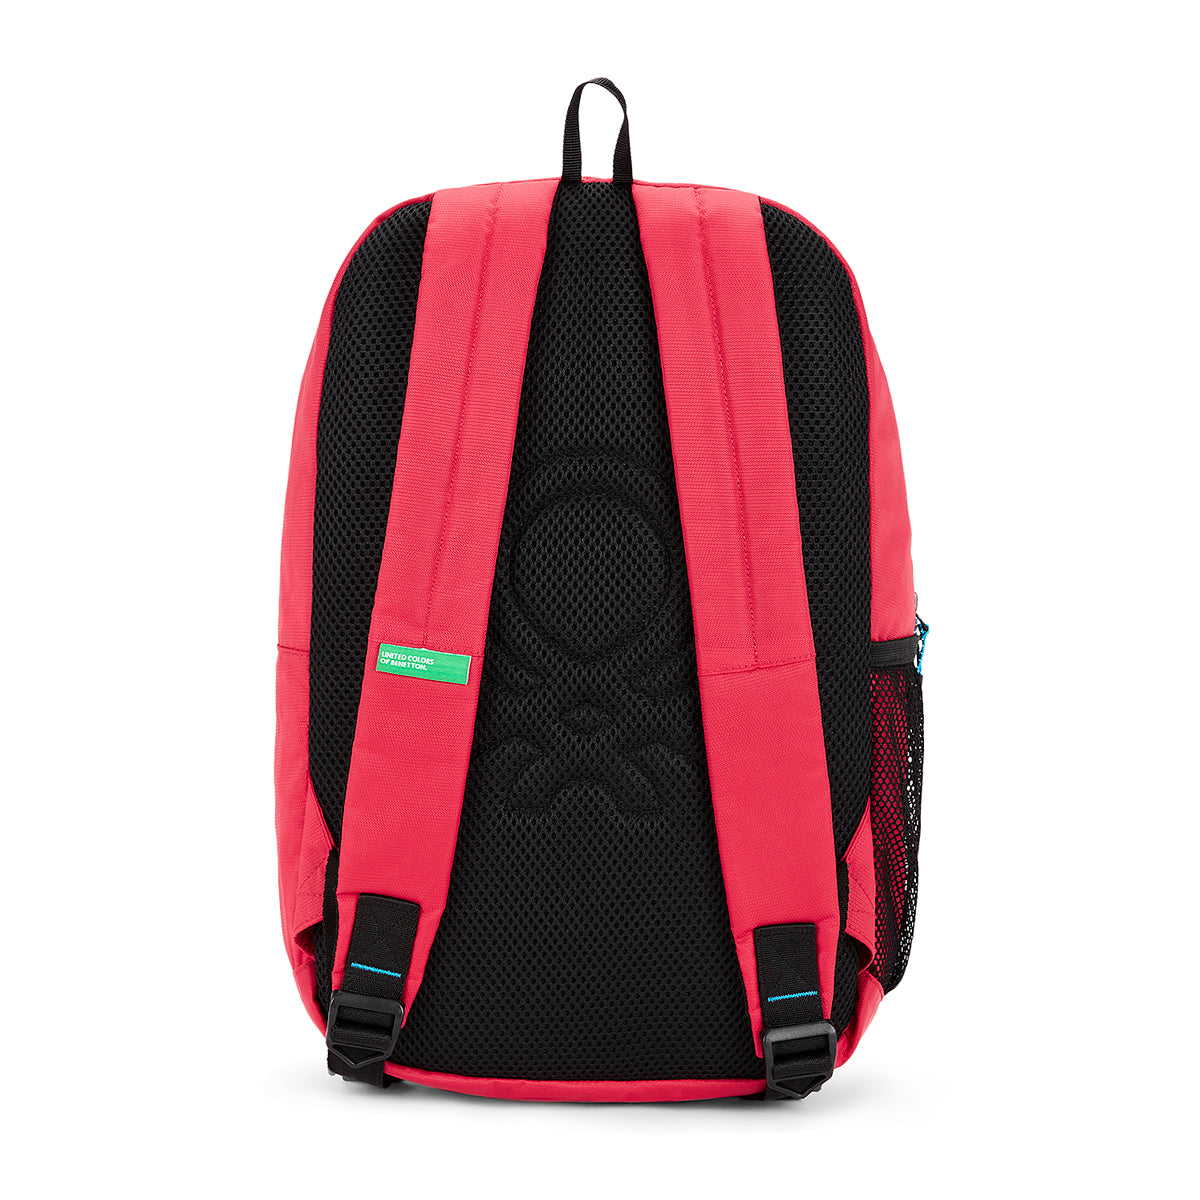 United Colors of Benetton Caspian Laptop Backpack Red